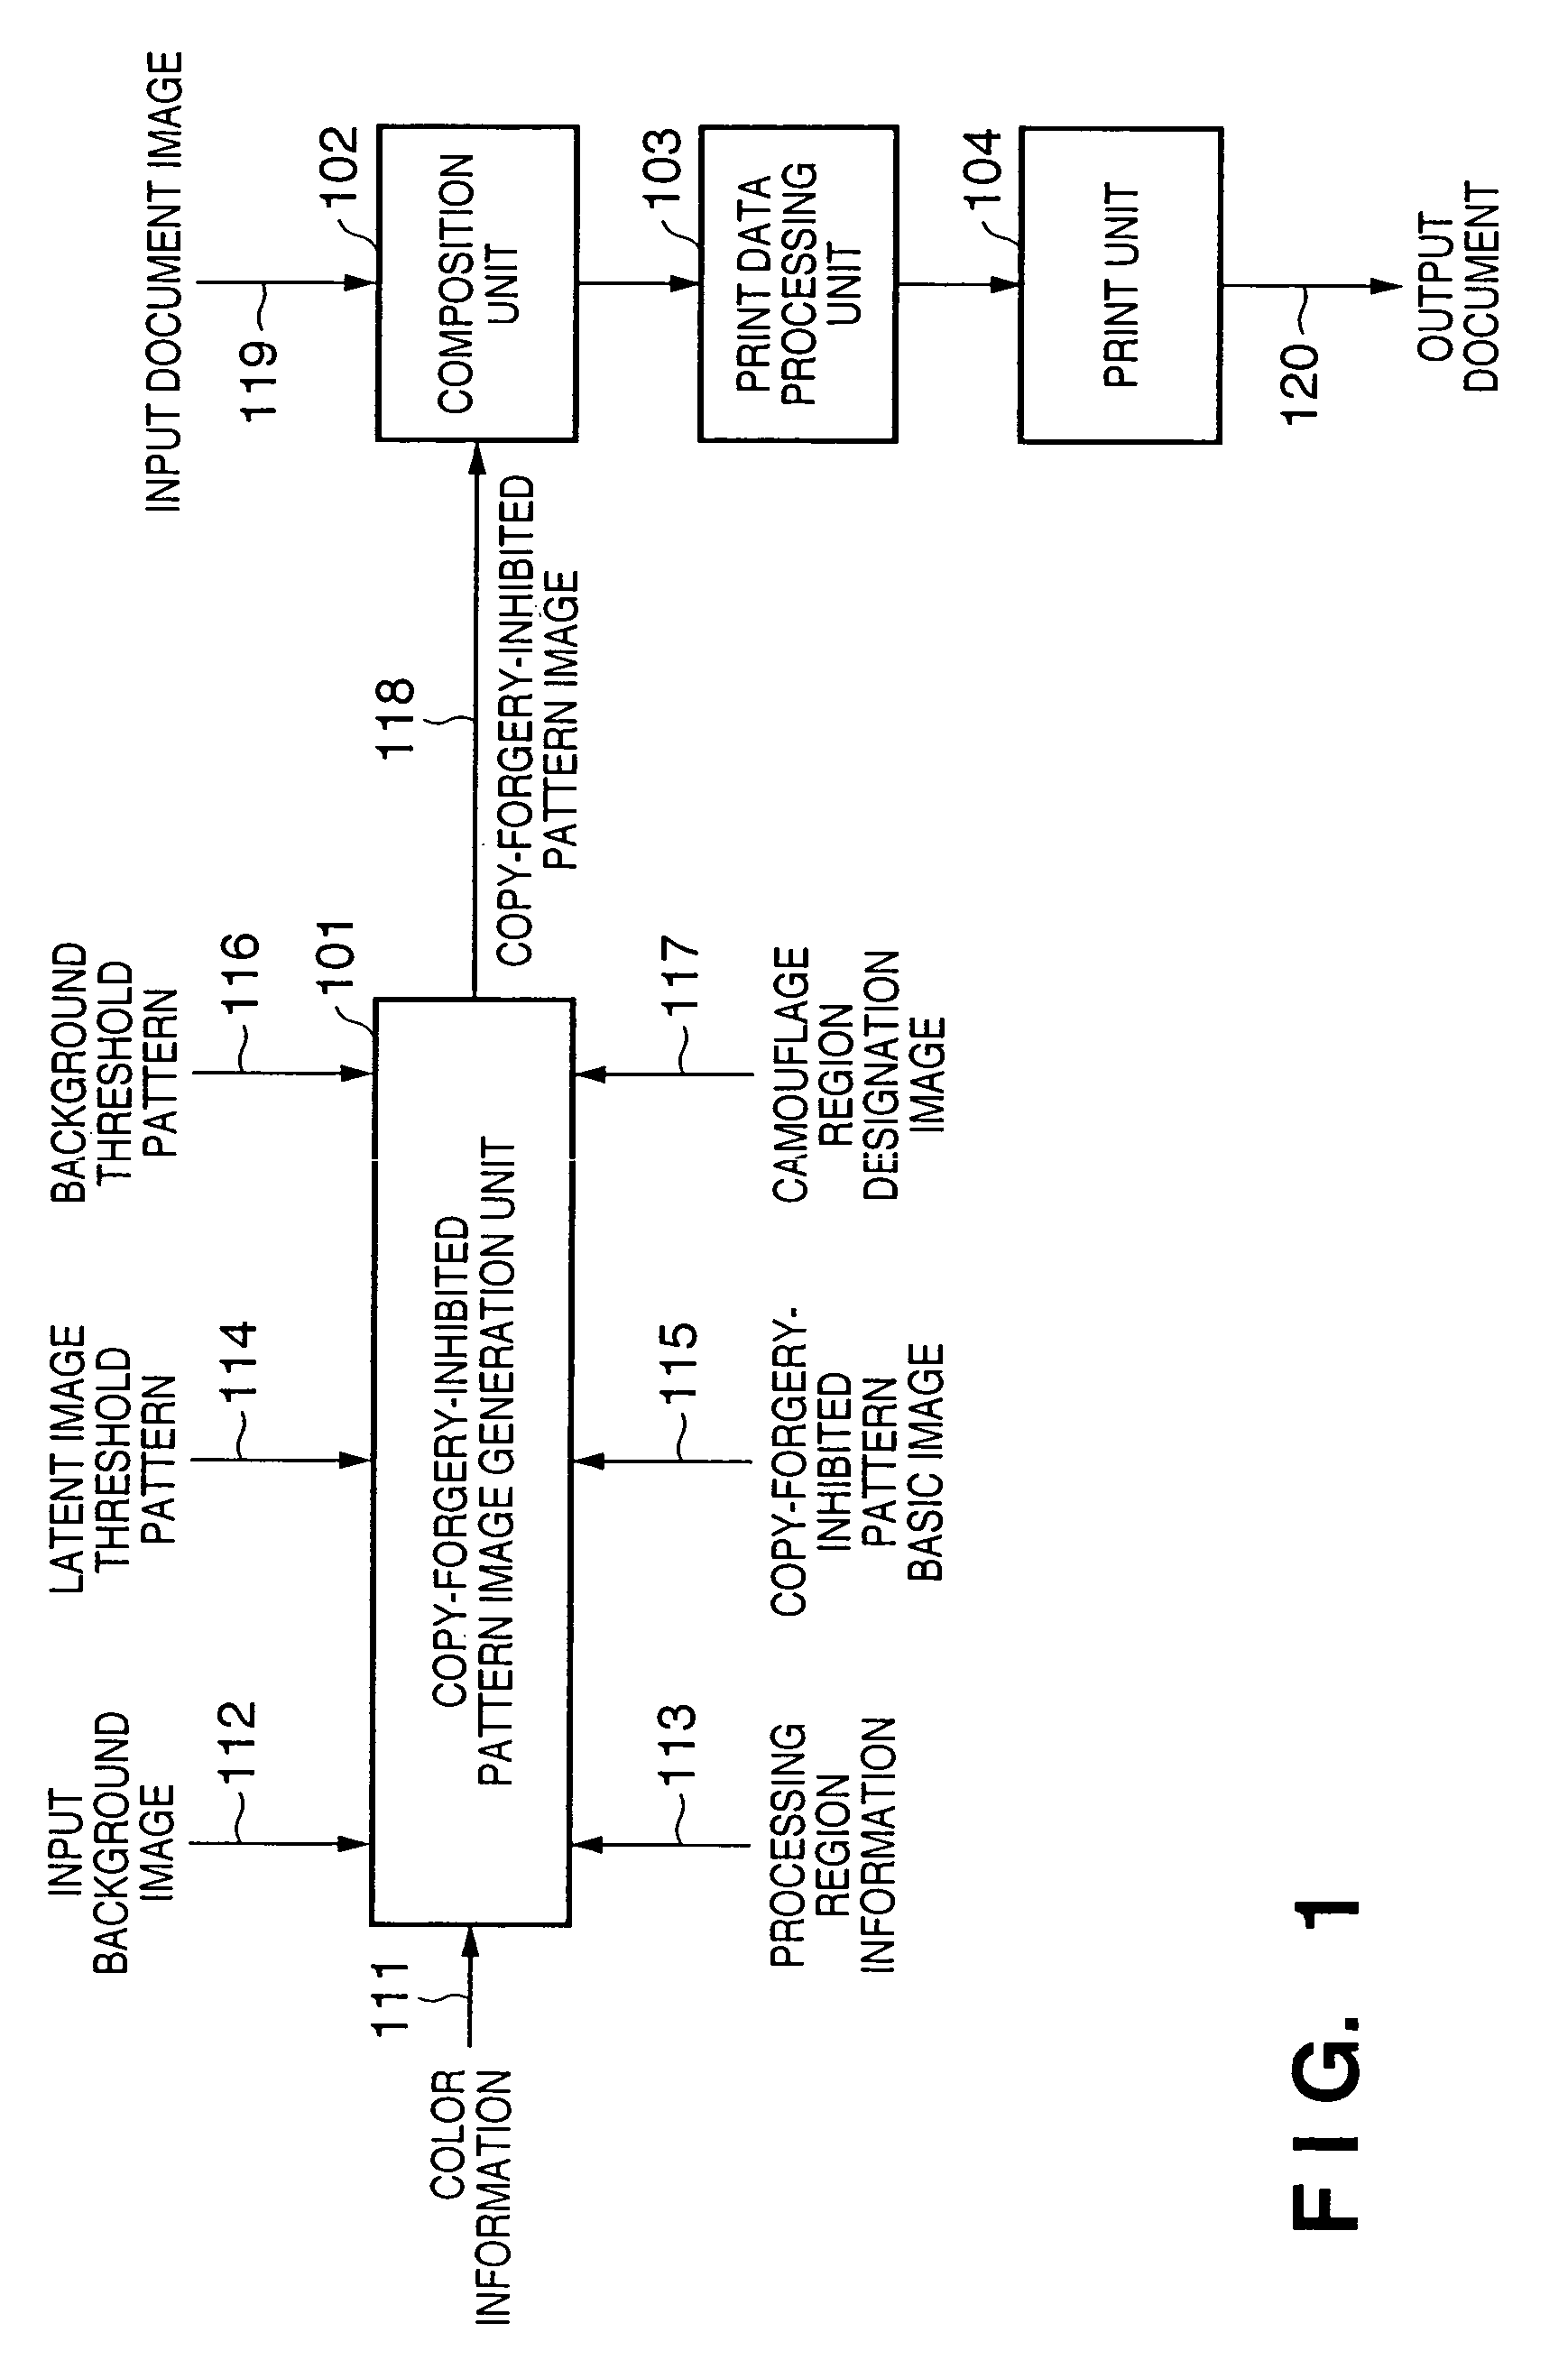 Copy-forgery-inhibited pattern image generation method and image processing apparatus